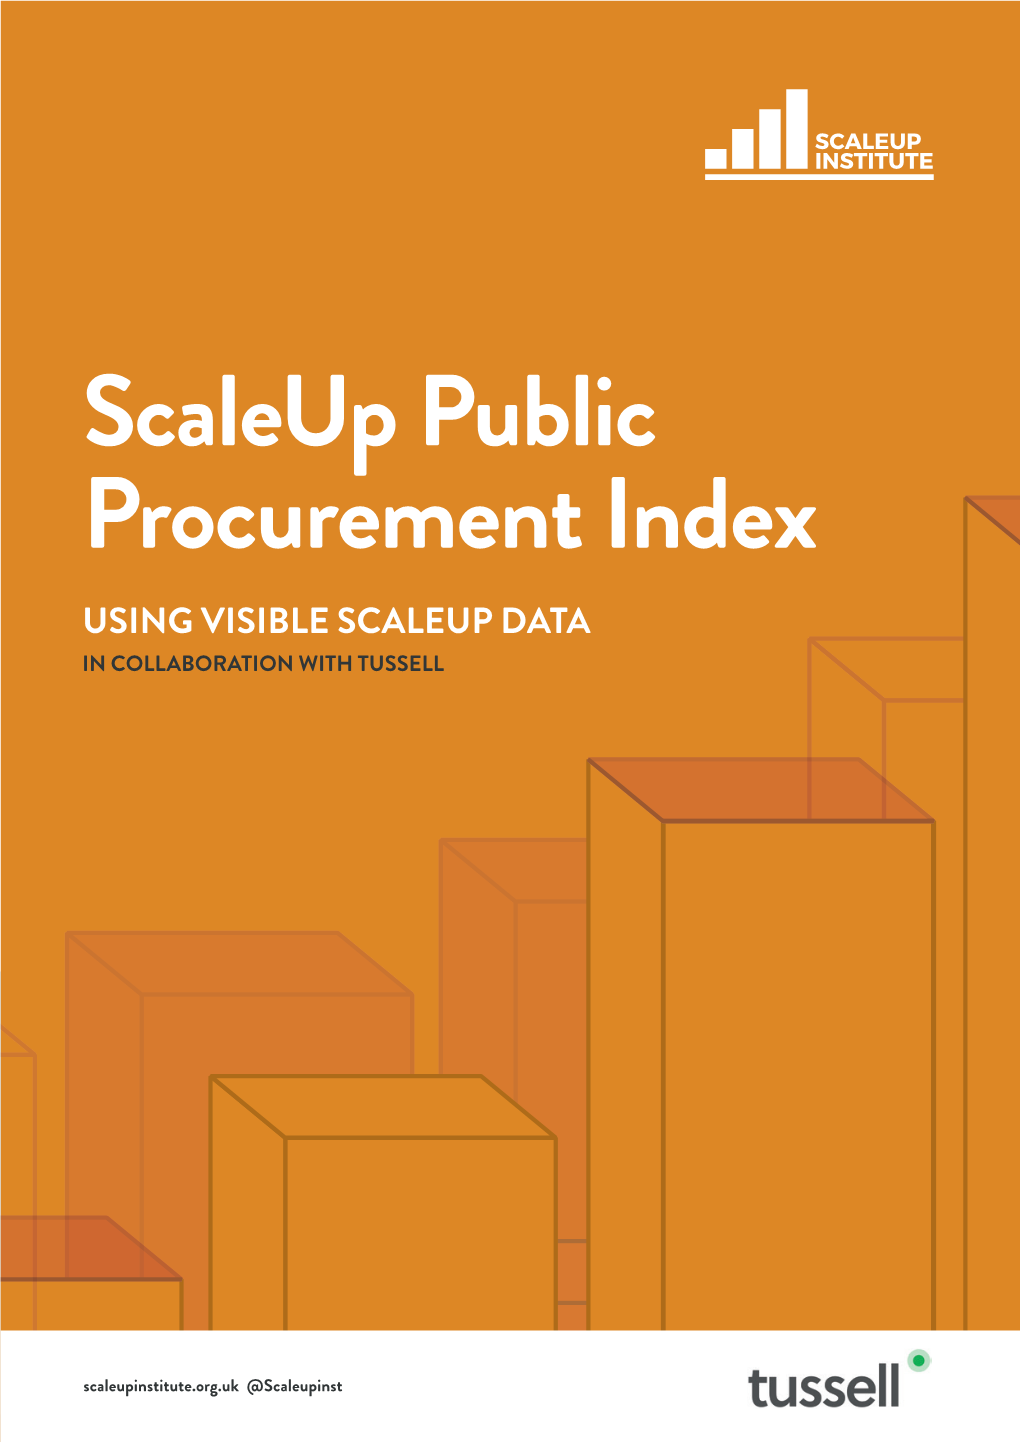 Scaleup Public Procurement Index USING VISIBLE SCALEUP DATA in COLLABORATION with TUSSELL